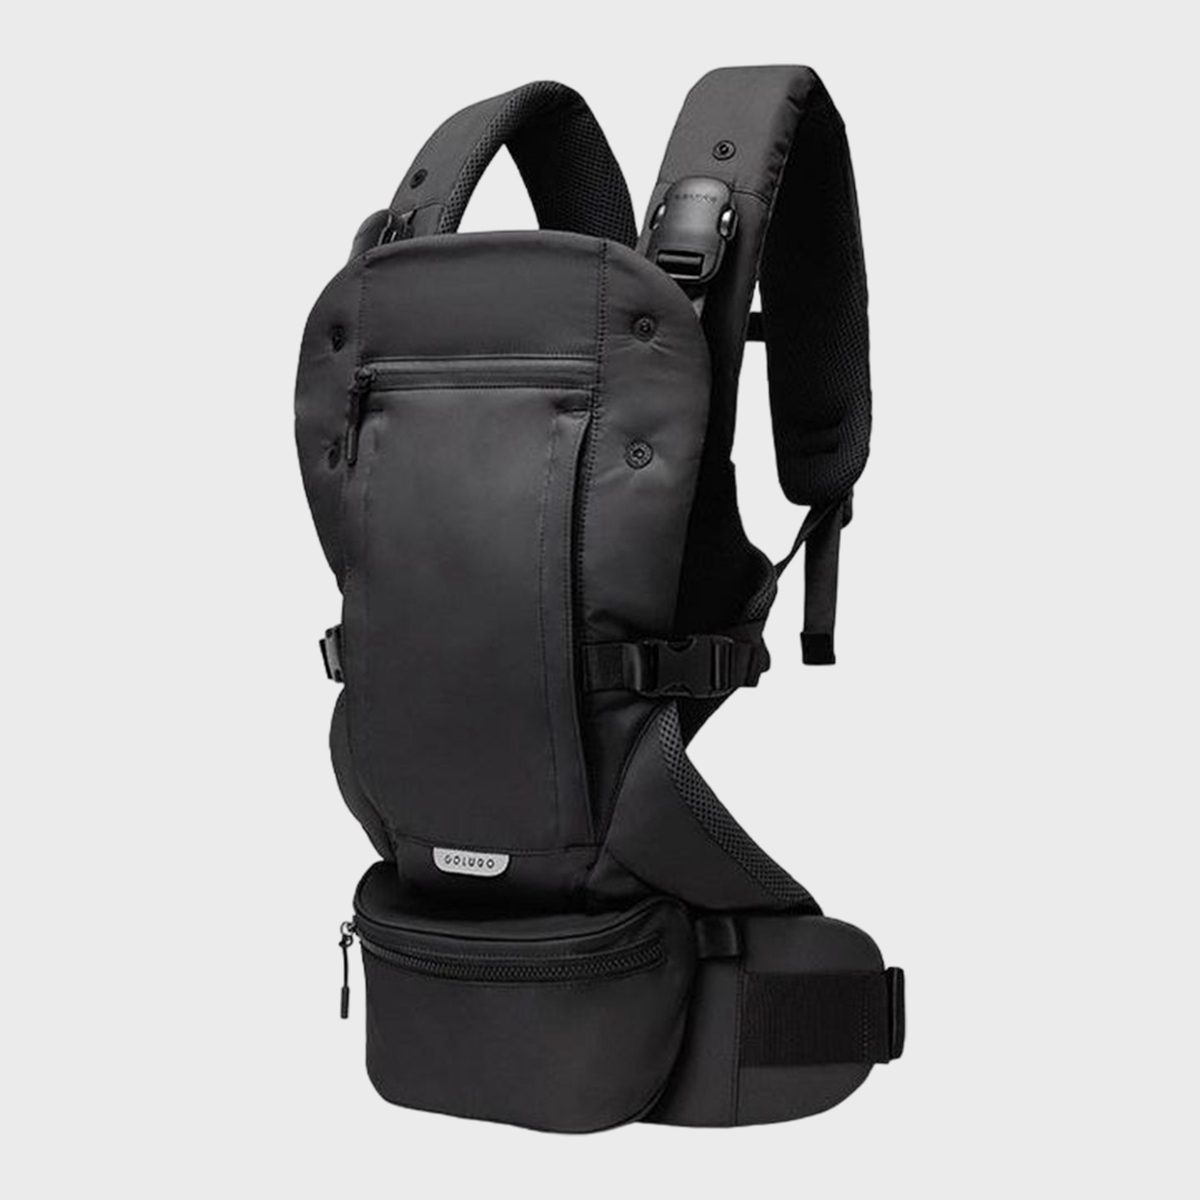 <p>Available in an array of trendy colors, this built-for-every-type-of-parent <a href="https://goto.target.com/Py4x5N" rel="noopener noreferrer">baby carrier</a> is the comfortable essential they'll reach for until their little cutie is too busy and independent to be carried. This hip healthy carrier features breathable mesh fabric which offers parents breezy comfort and sweat-free relaxation for little ones. But the best part about this carrier is its integrated lumbar support that helps evenly distribute weight and takes the strain off of <a href="https://www.rd.com/list/best-mattress-for-back-pain/">parents' backs</a>.</p> <p class="listicle-page__cta-button-shop"><a class="shop-btn" href="https://goto.target.com/Py4x5N">Shop Now</a></p>